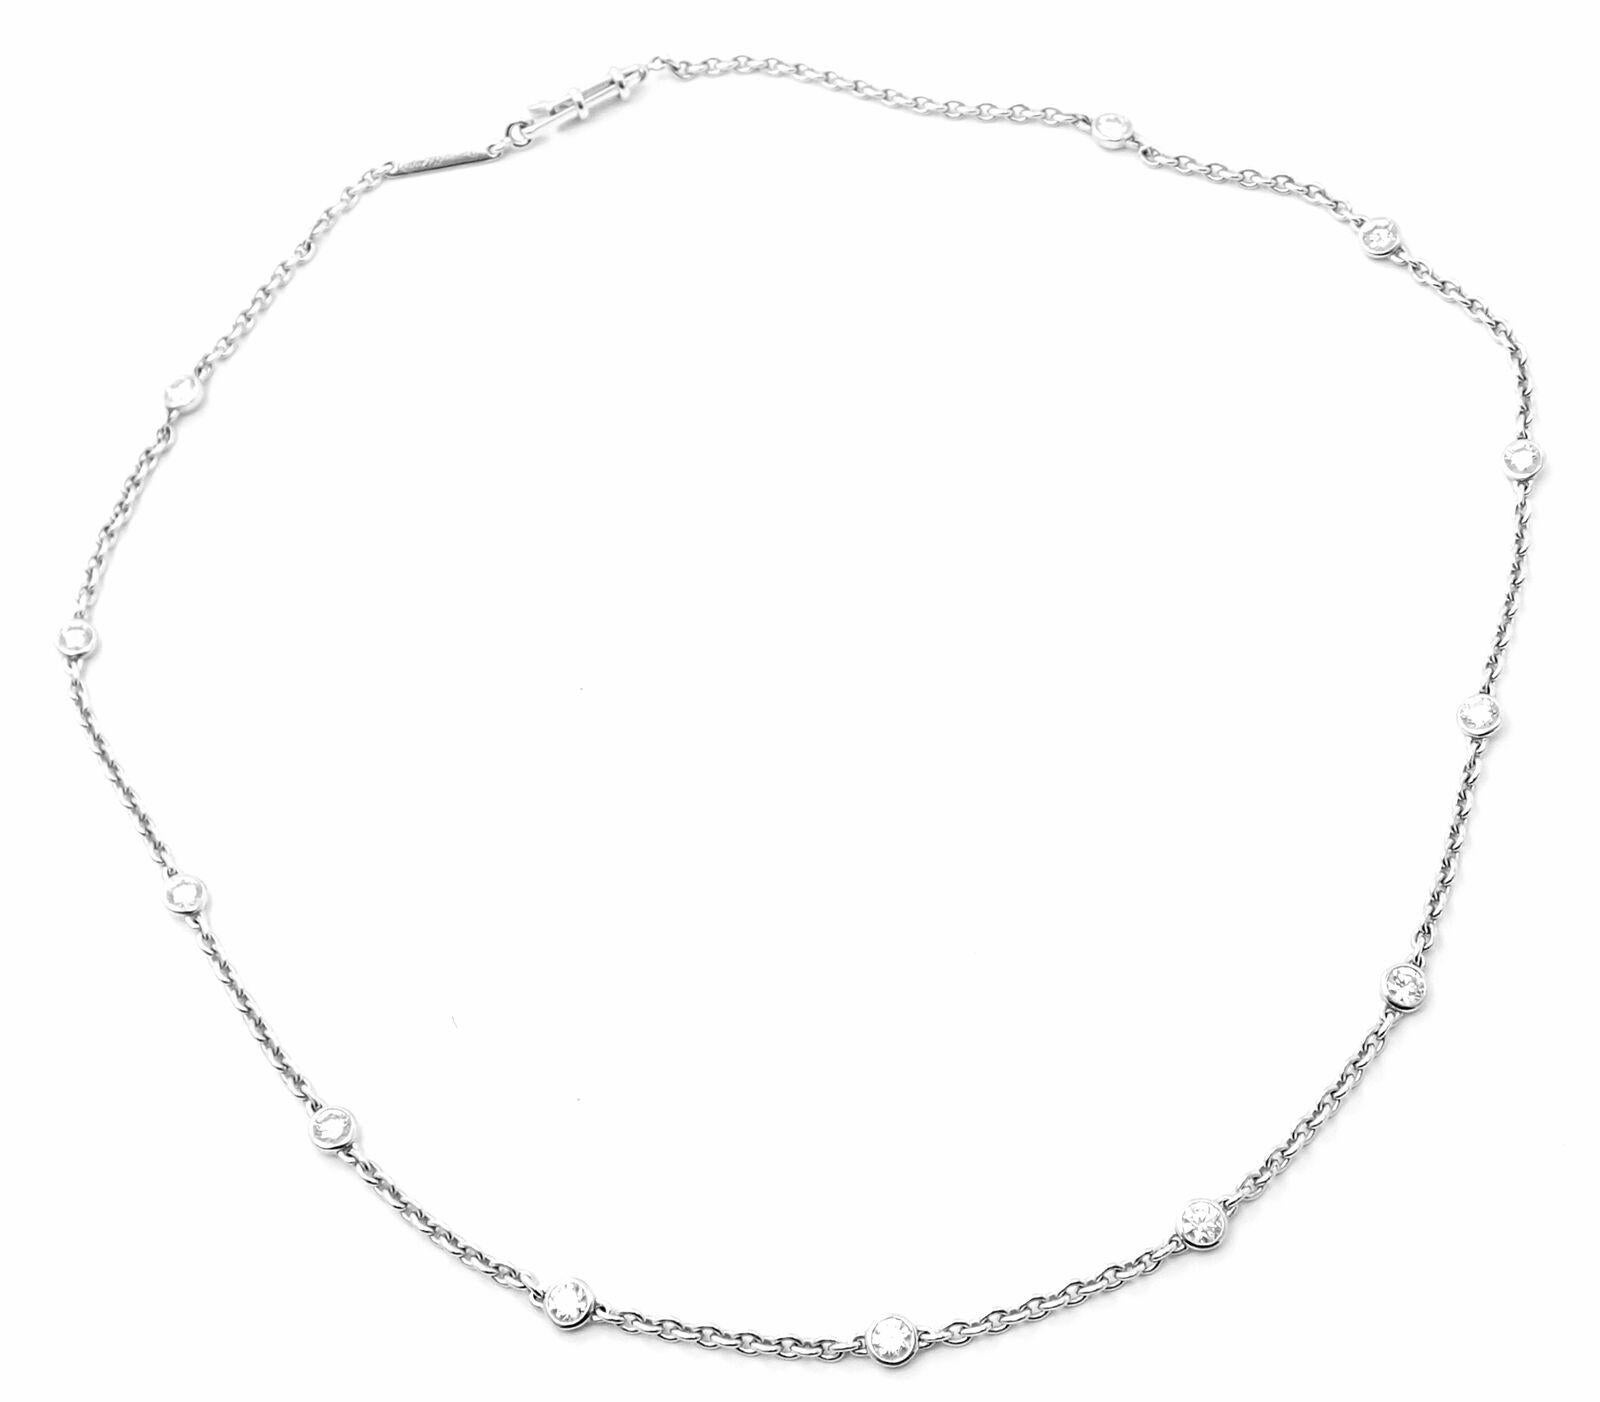 18k White Gold Diamond By The Yard Choker Necklace by Cartier.
With 12 round brilliant cut diamonds VS1 clarity, G color total weight 1.5ct
Details:
Chain: Length 14.5